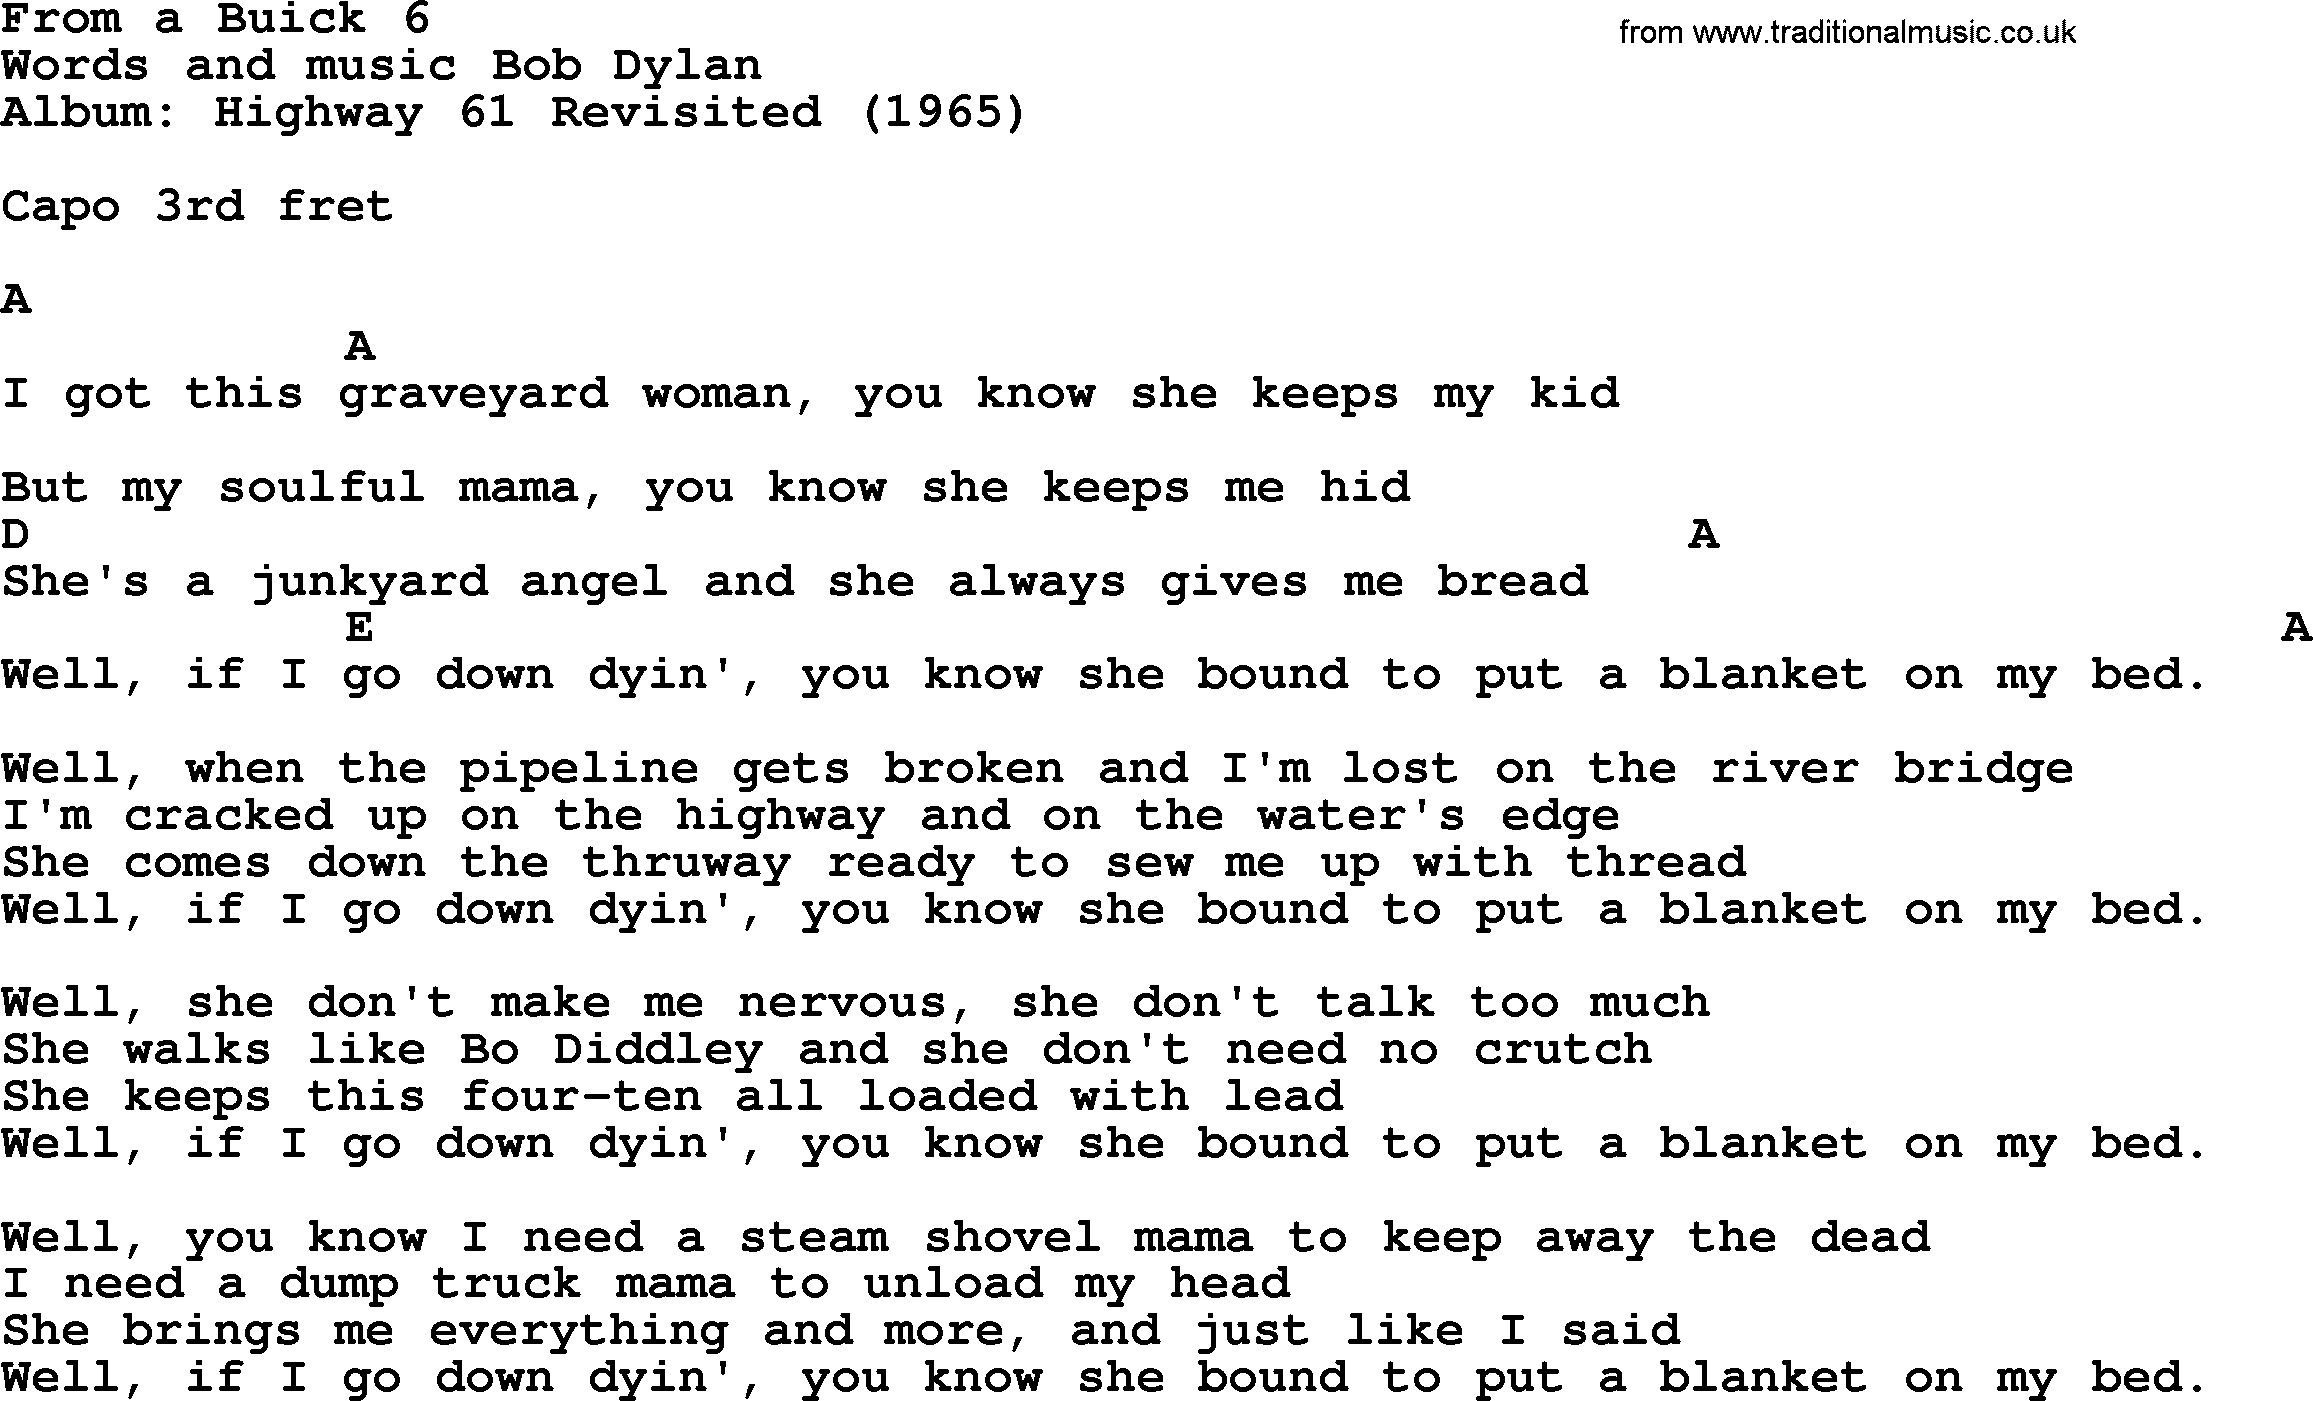 Bob Dylan song, lyrics with chords - From a Buick 6